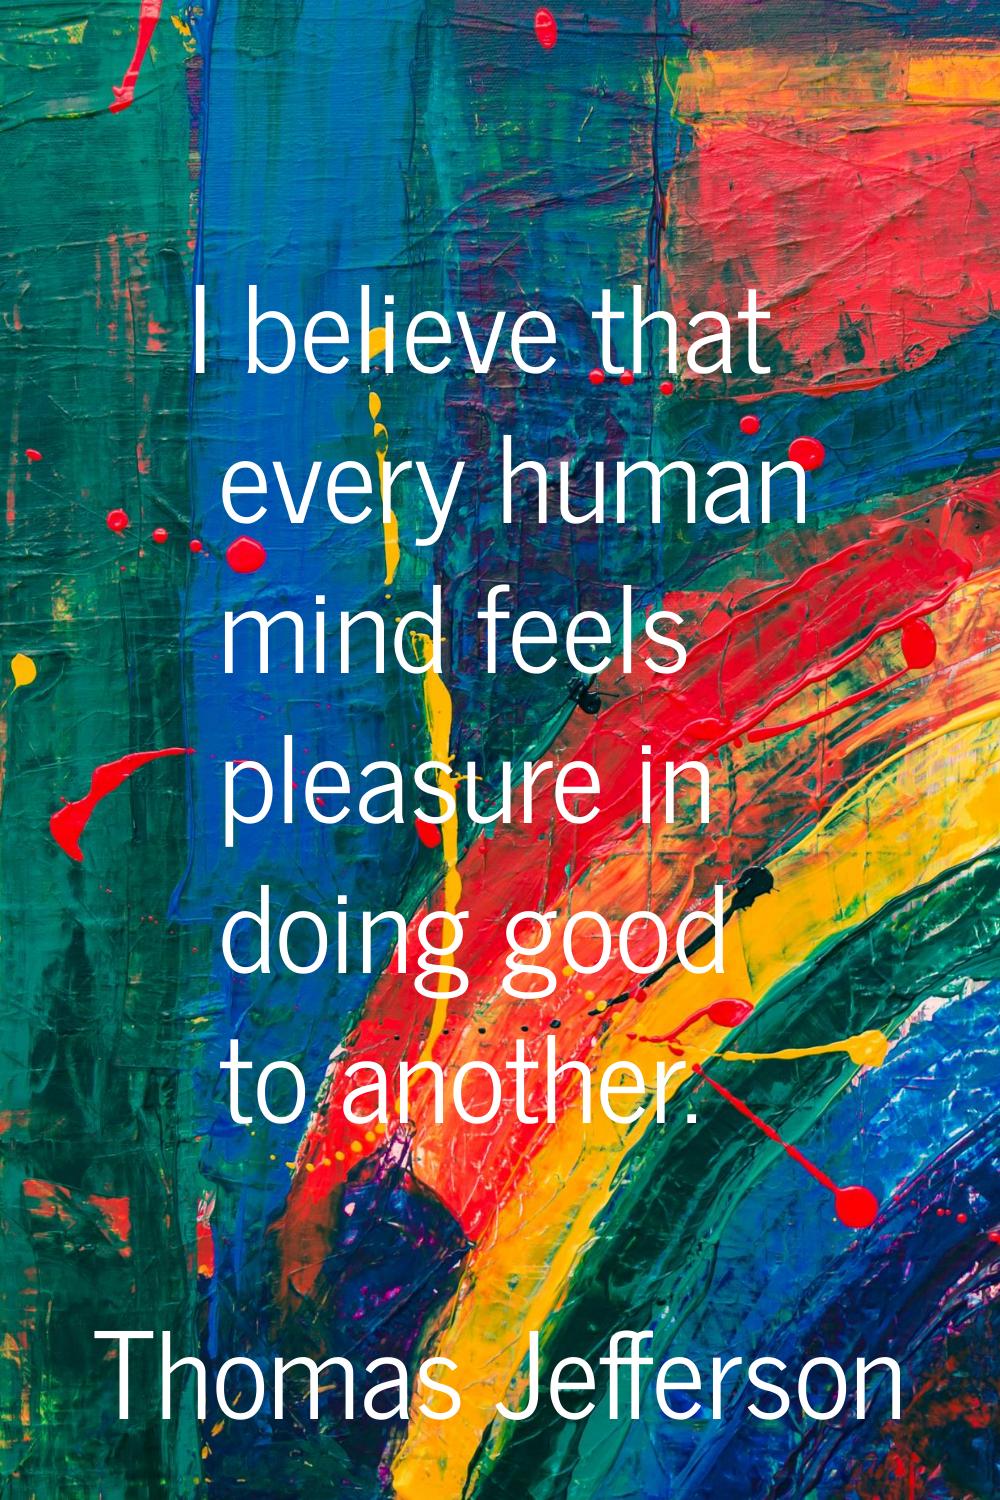 I believe that every human mind feels pleasure in doing good to another.